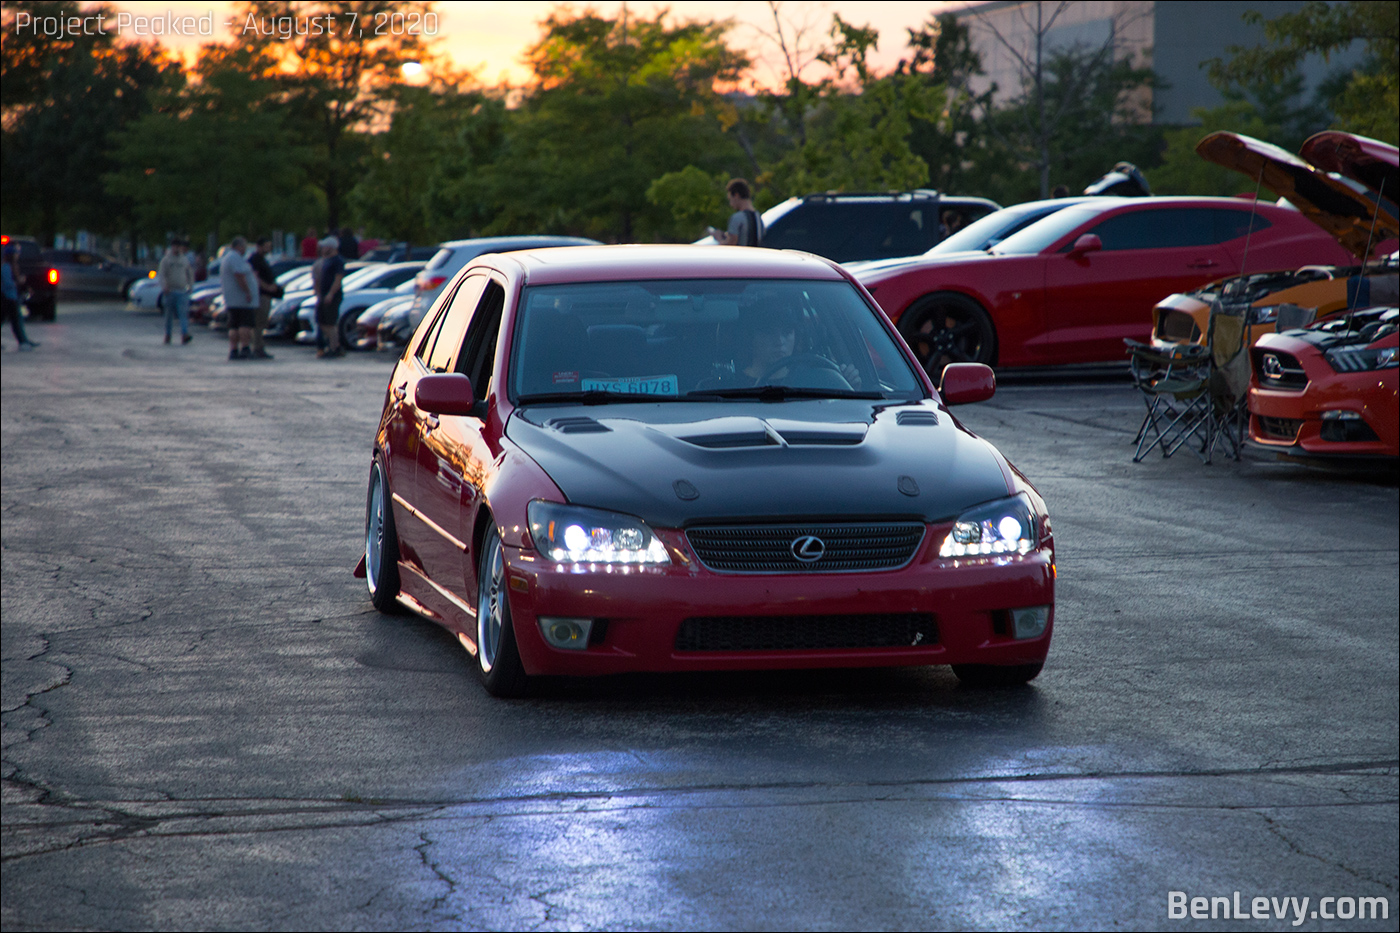 Modded Red Lexus IS300